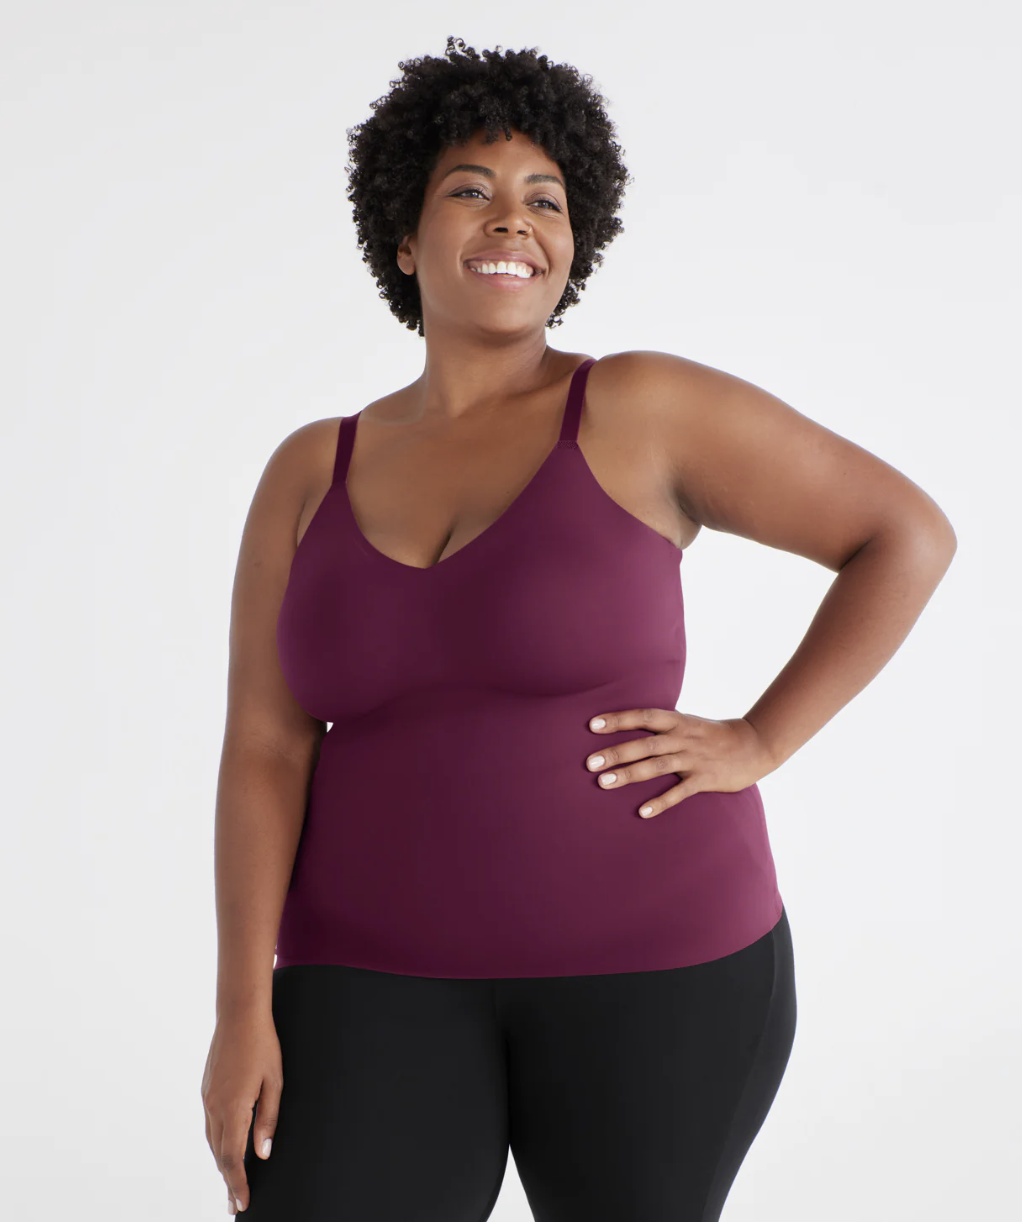 a model wearing the tank top with leggings in front of a plain background